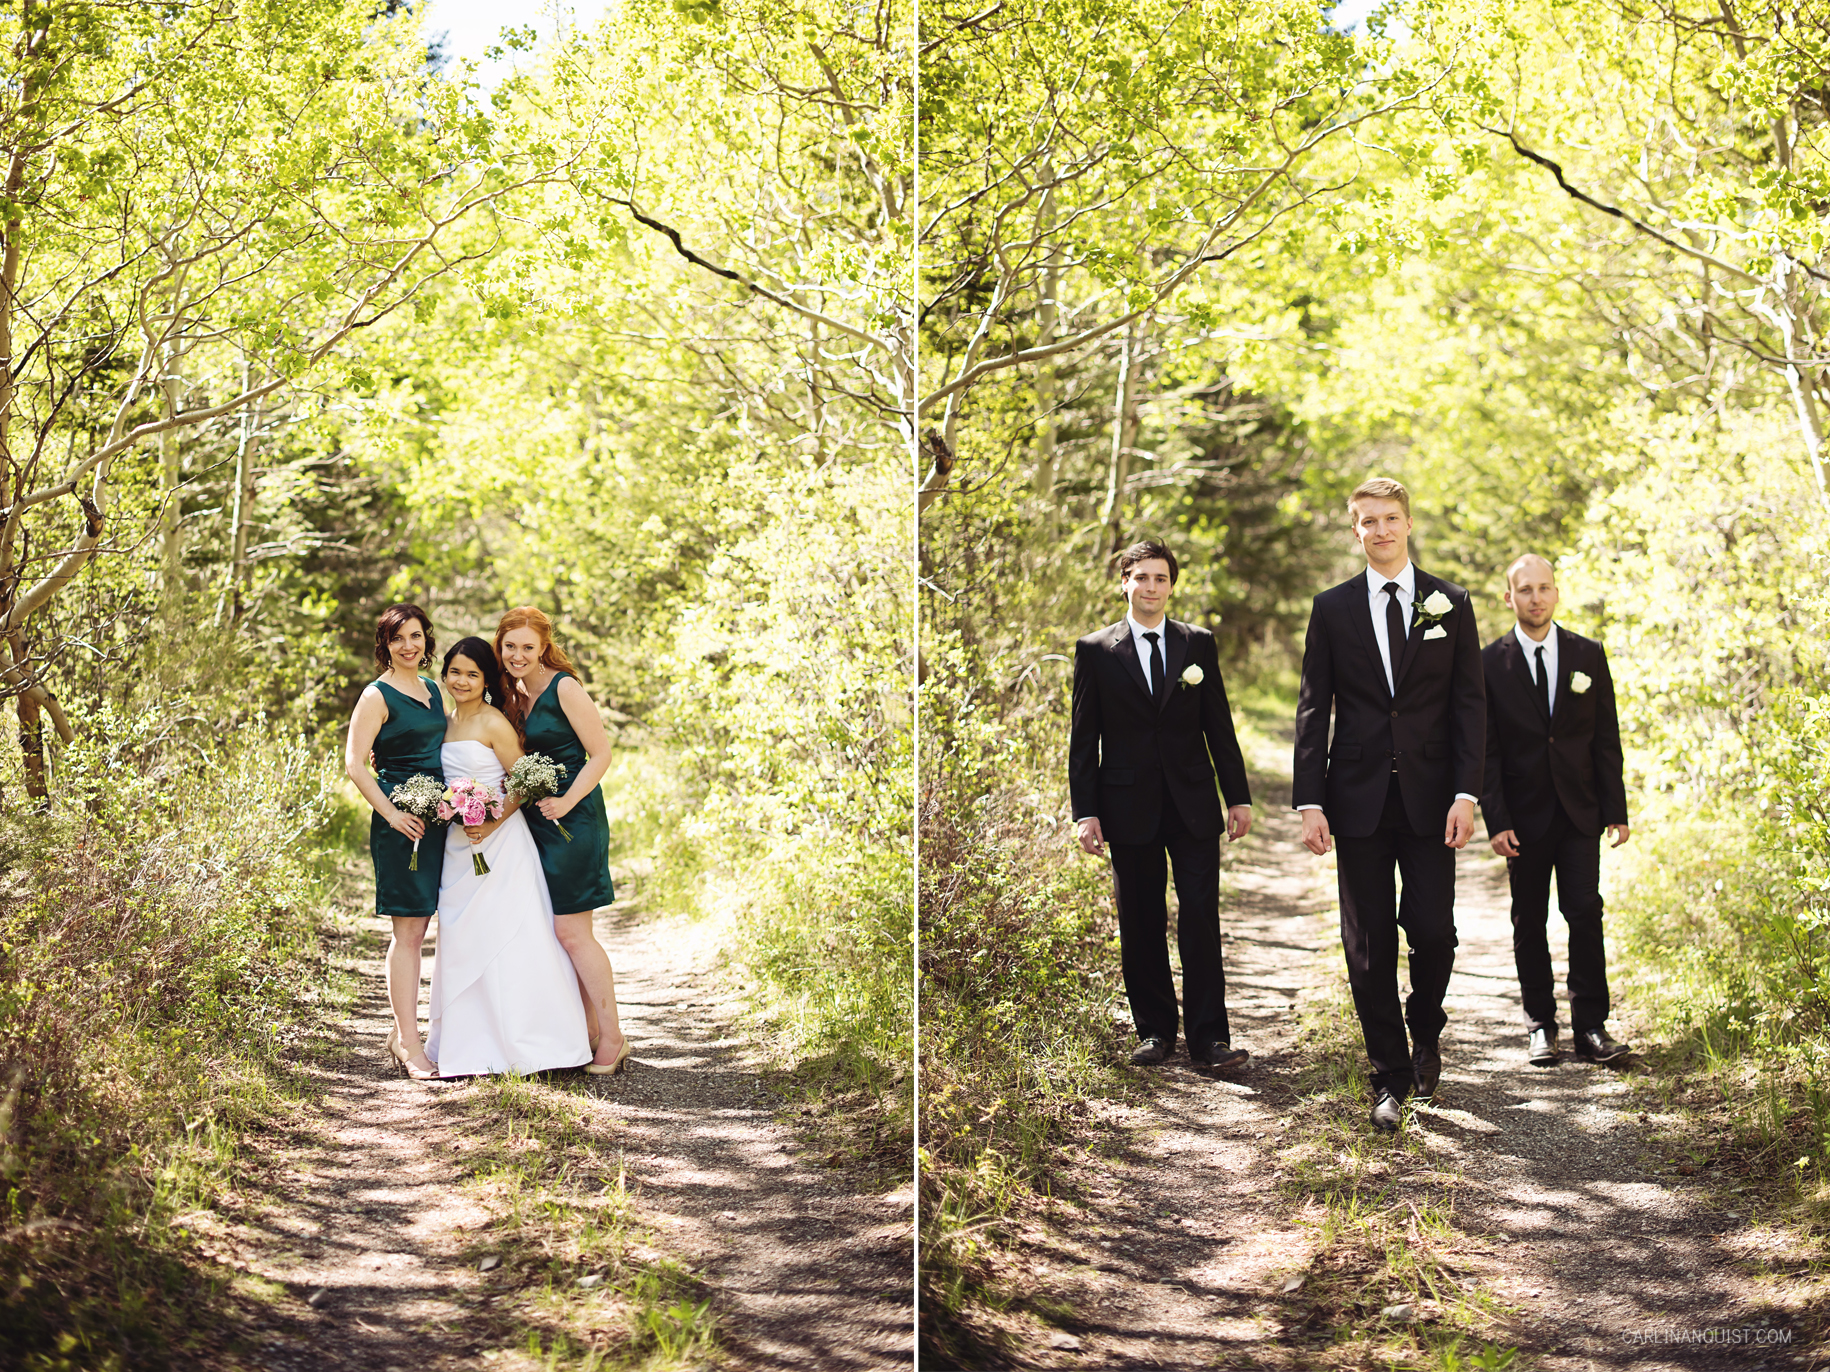 Bridal Party | Crowsnest Pass Wedding Photographers | Carlin Anquist Photography